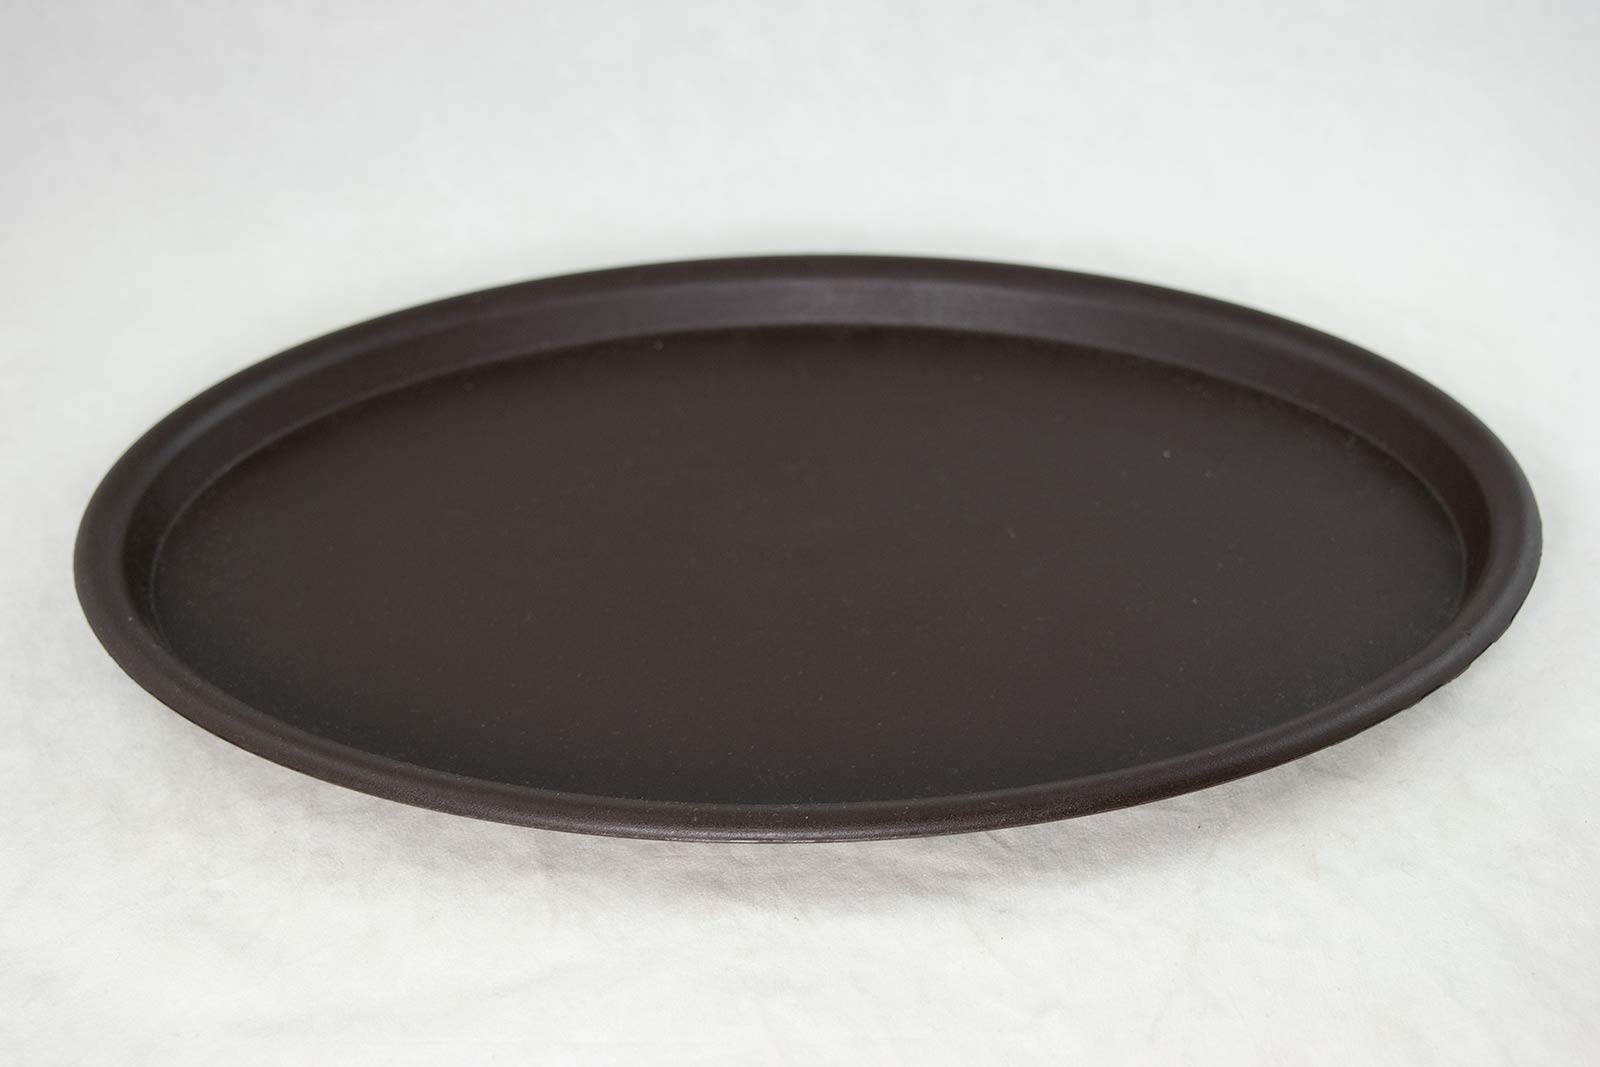 Calibonsai 3 Mix oval Brown Plastic Humidity Tray for Bonsai Tree-9 inch,10.75 inch and 12.5 inch